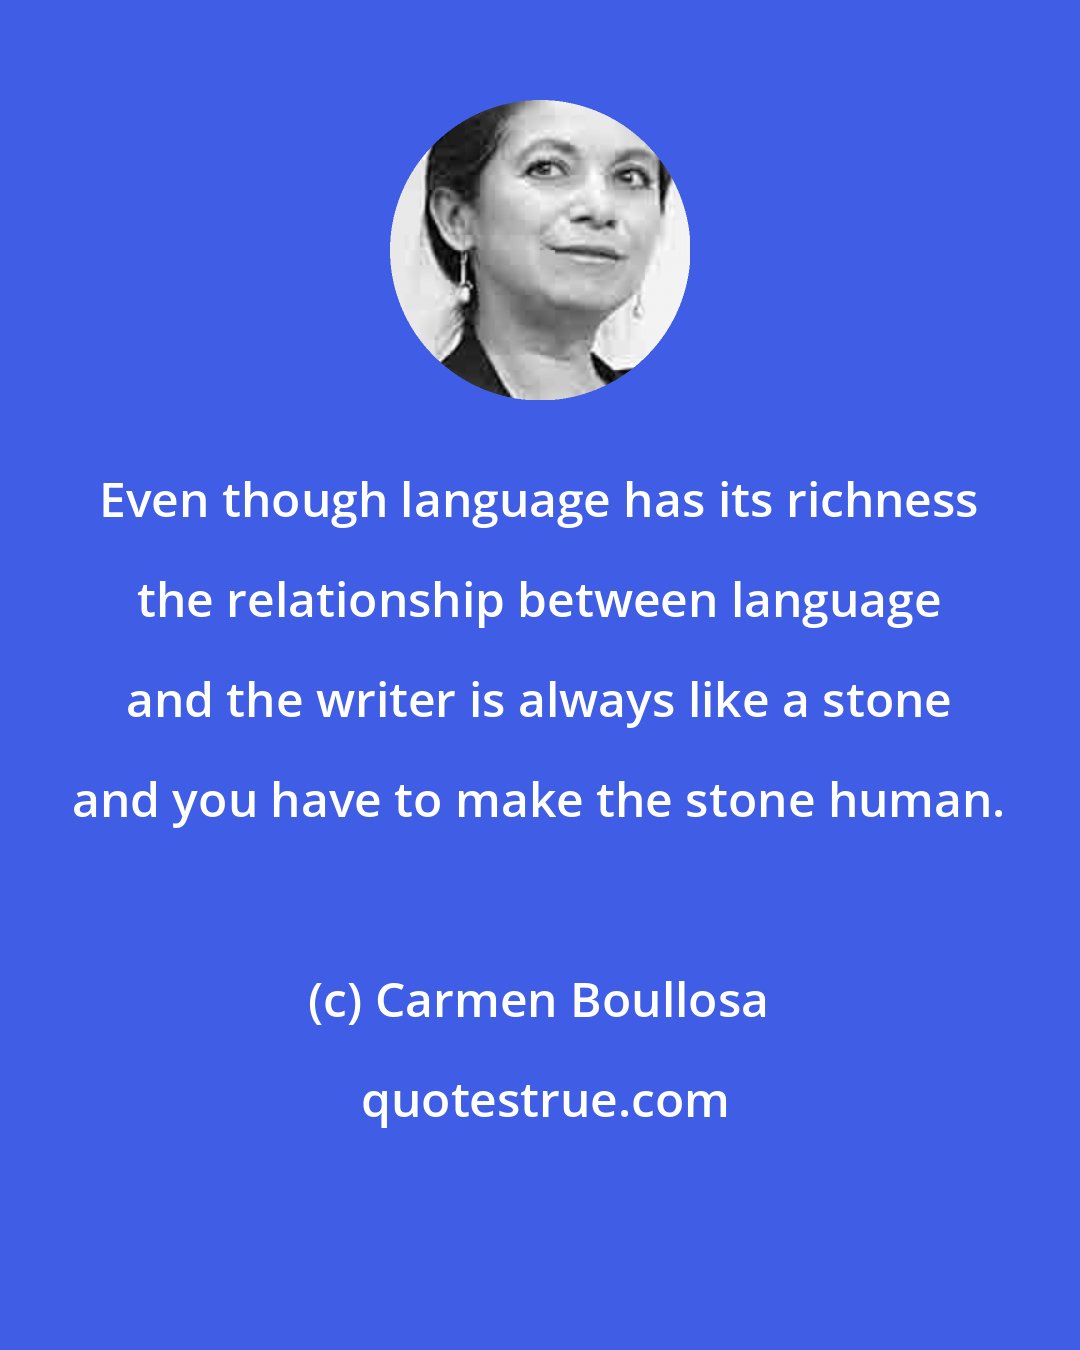 Carmen Boullosa: Even though language has its richness the relationship between language and the writer is always like a stone and you have to make the stone human.